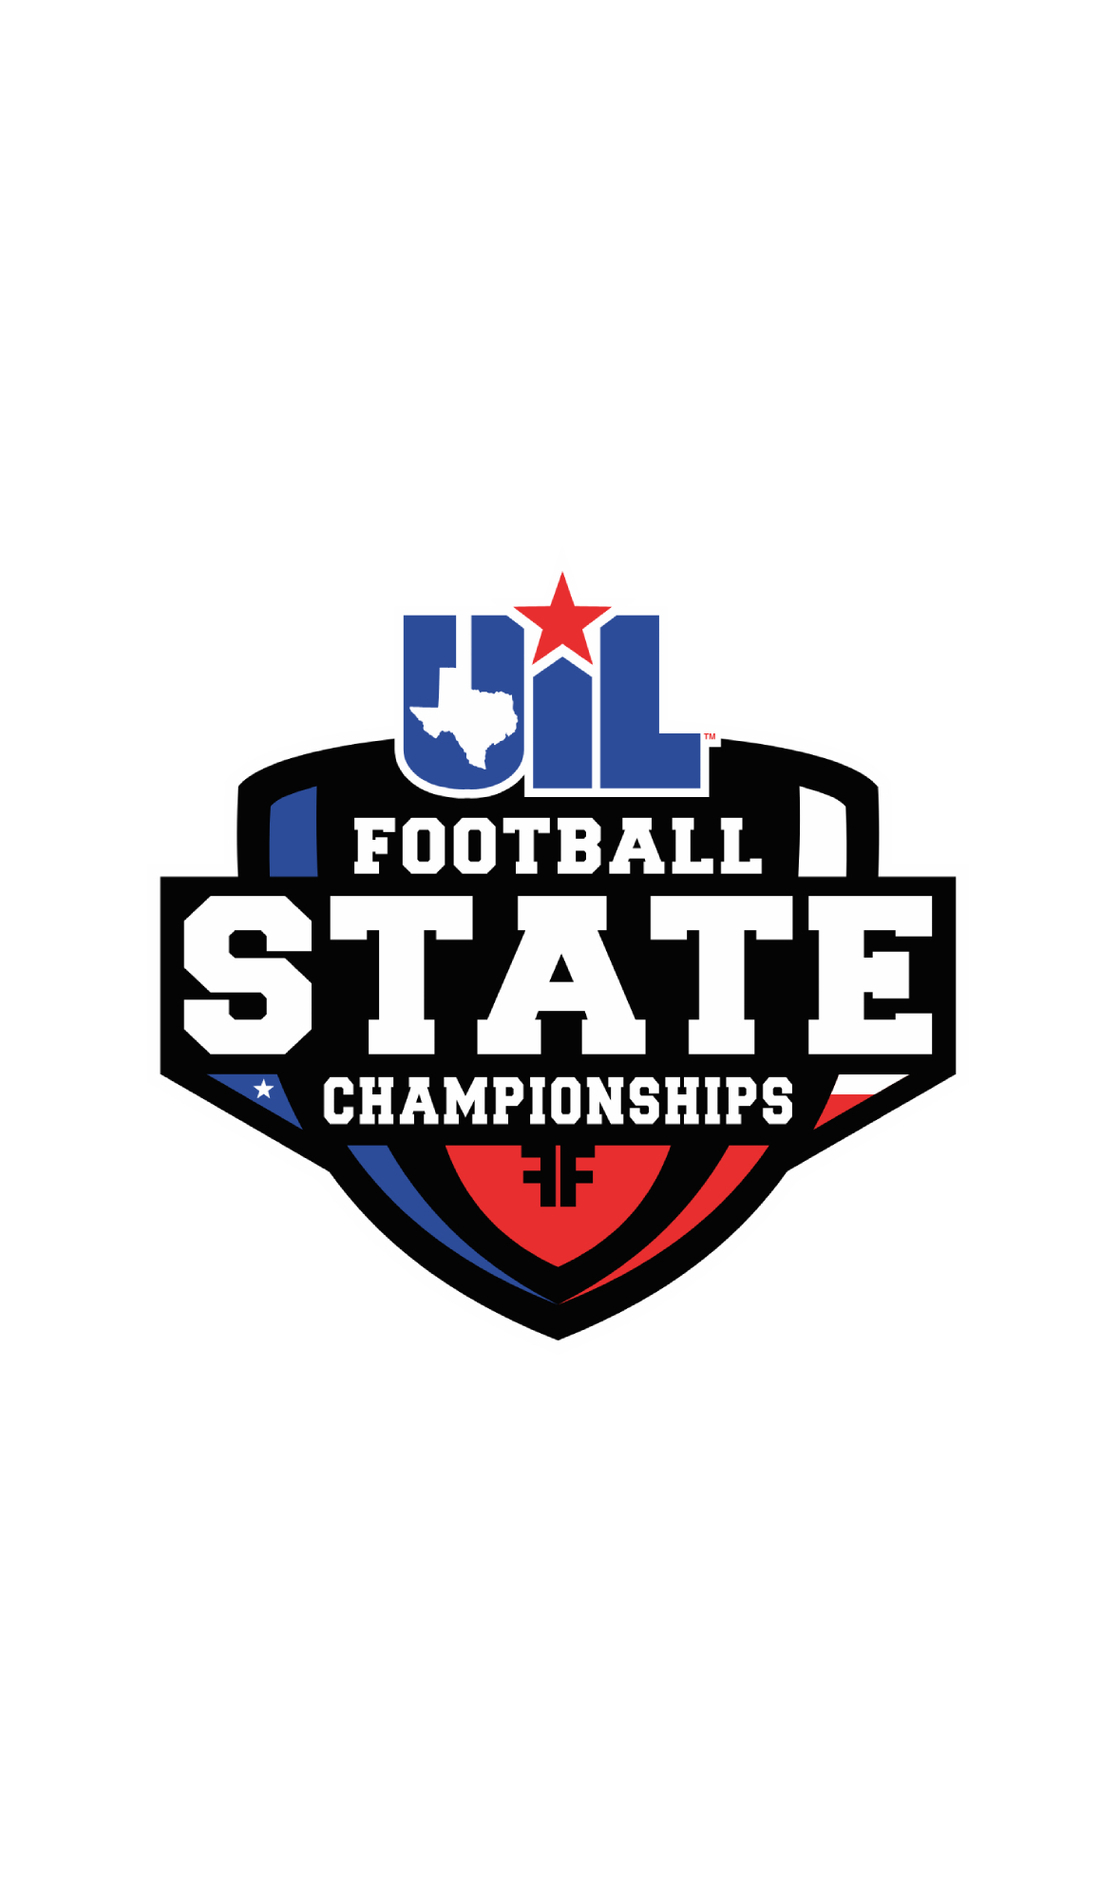 A UIL High School Football State Championships live event